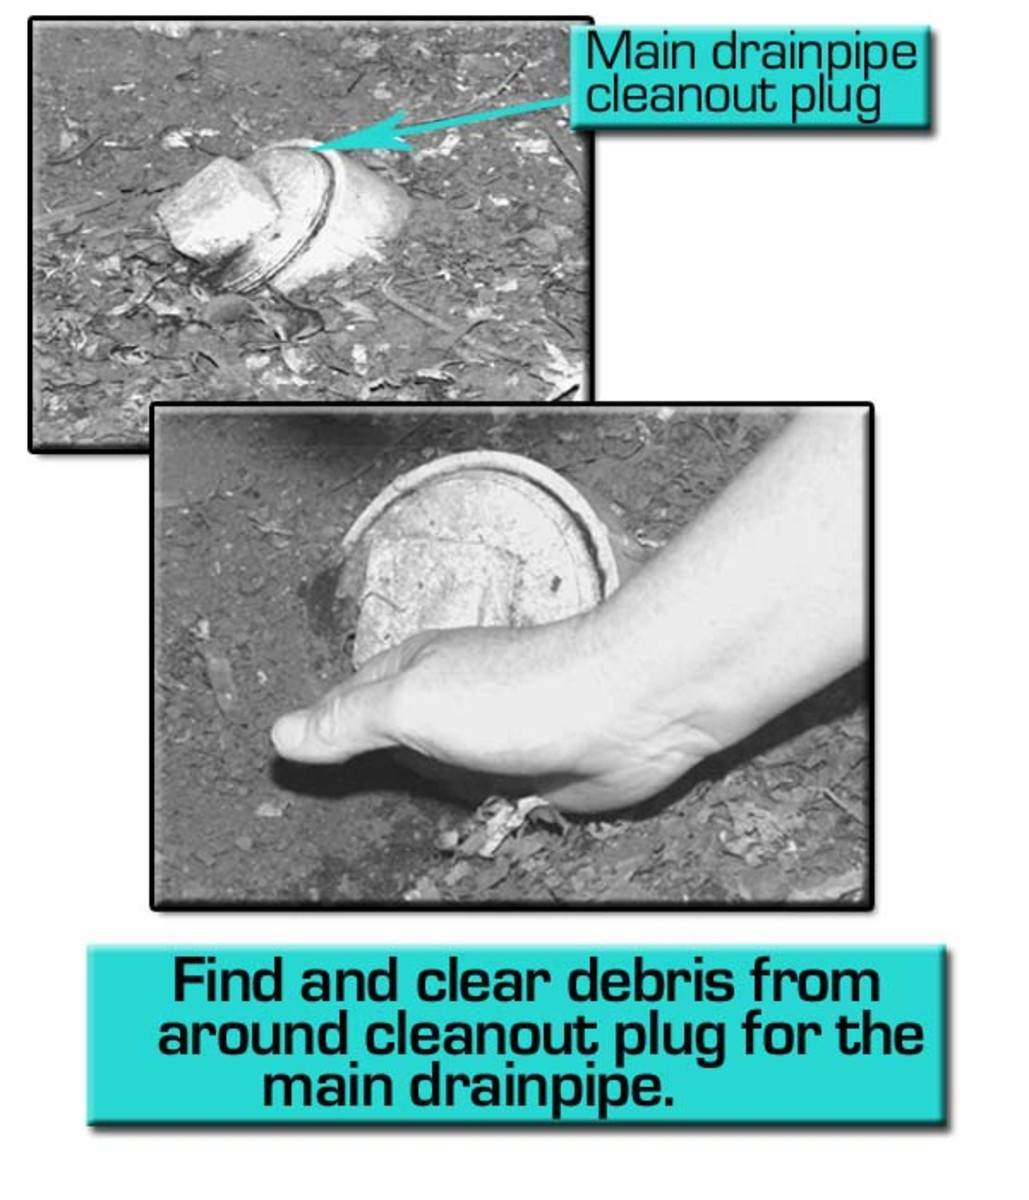 Remove debris and dirt from around main drainpipe cleanout plug.